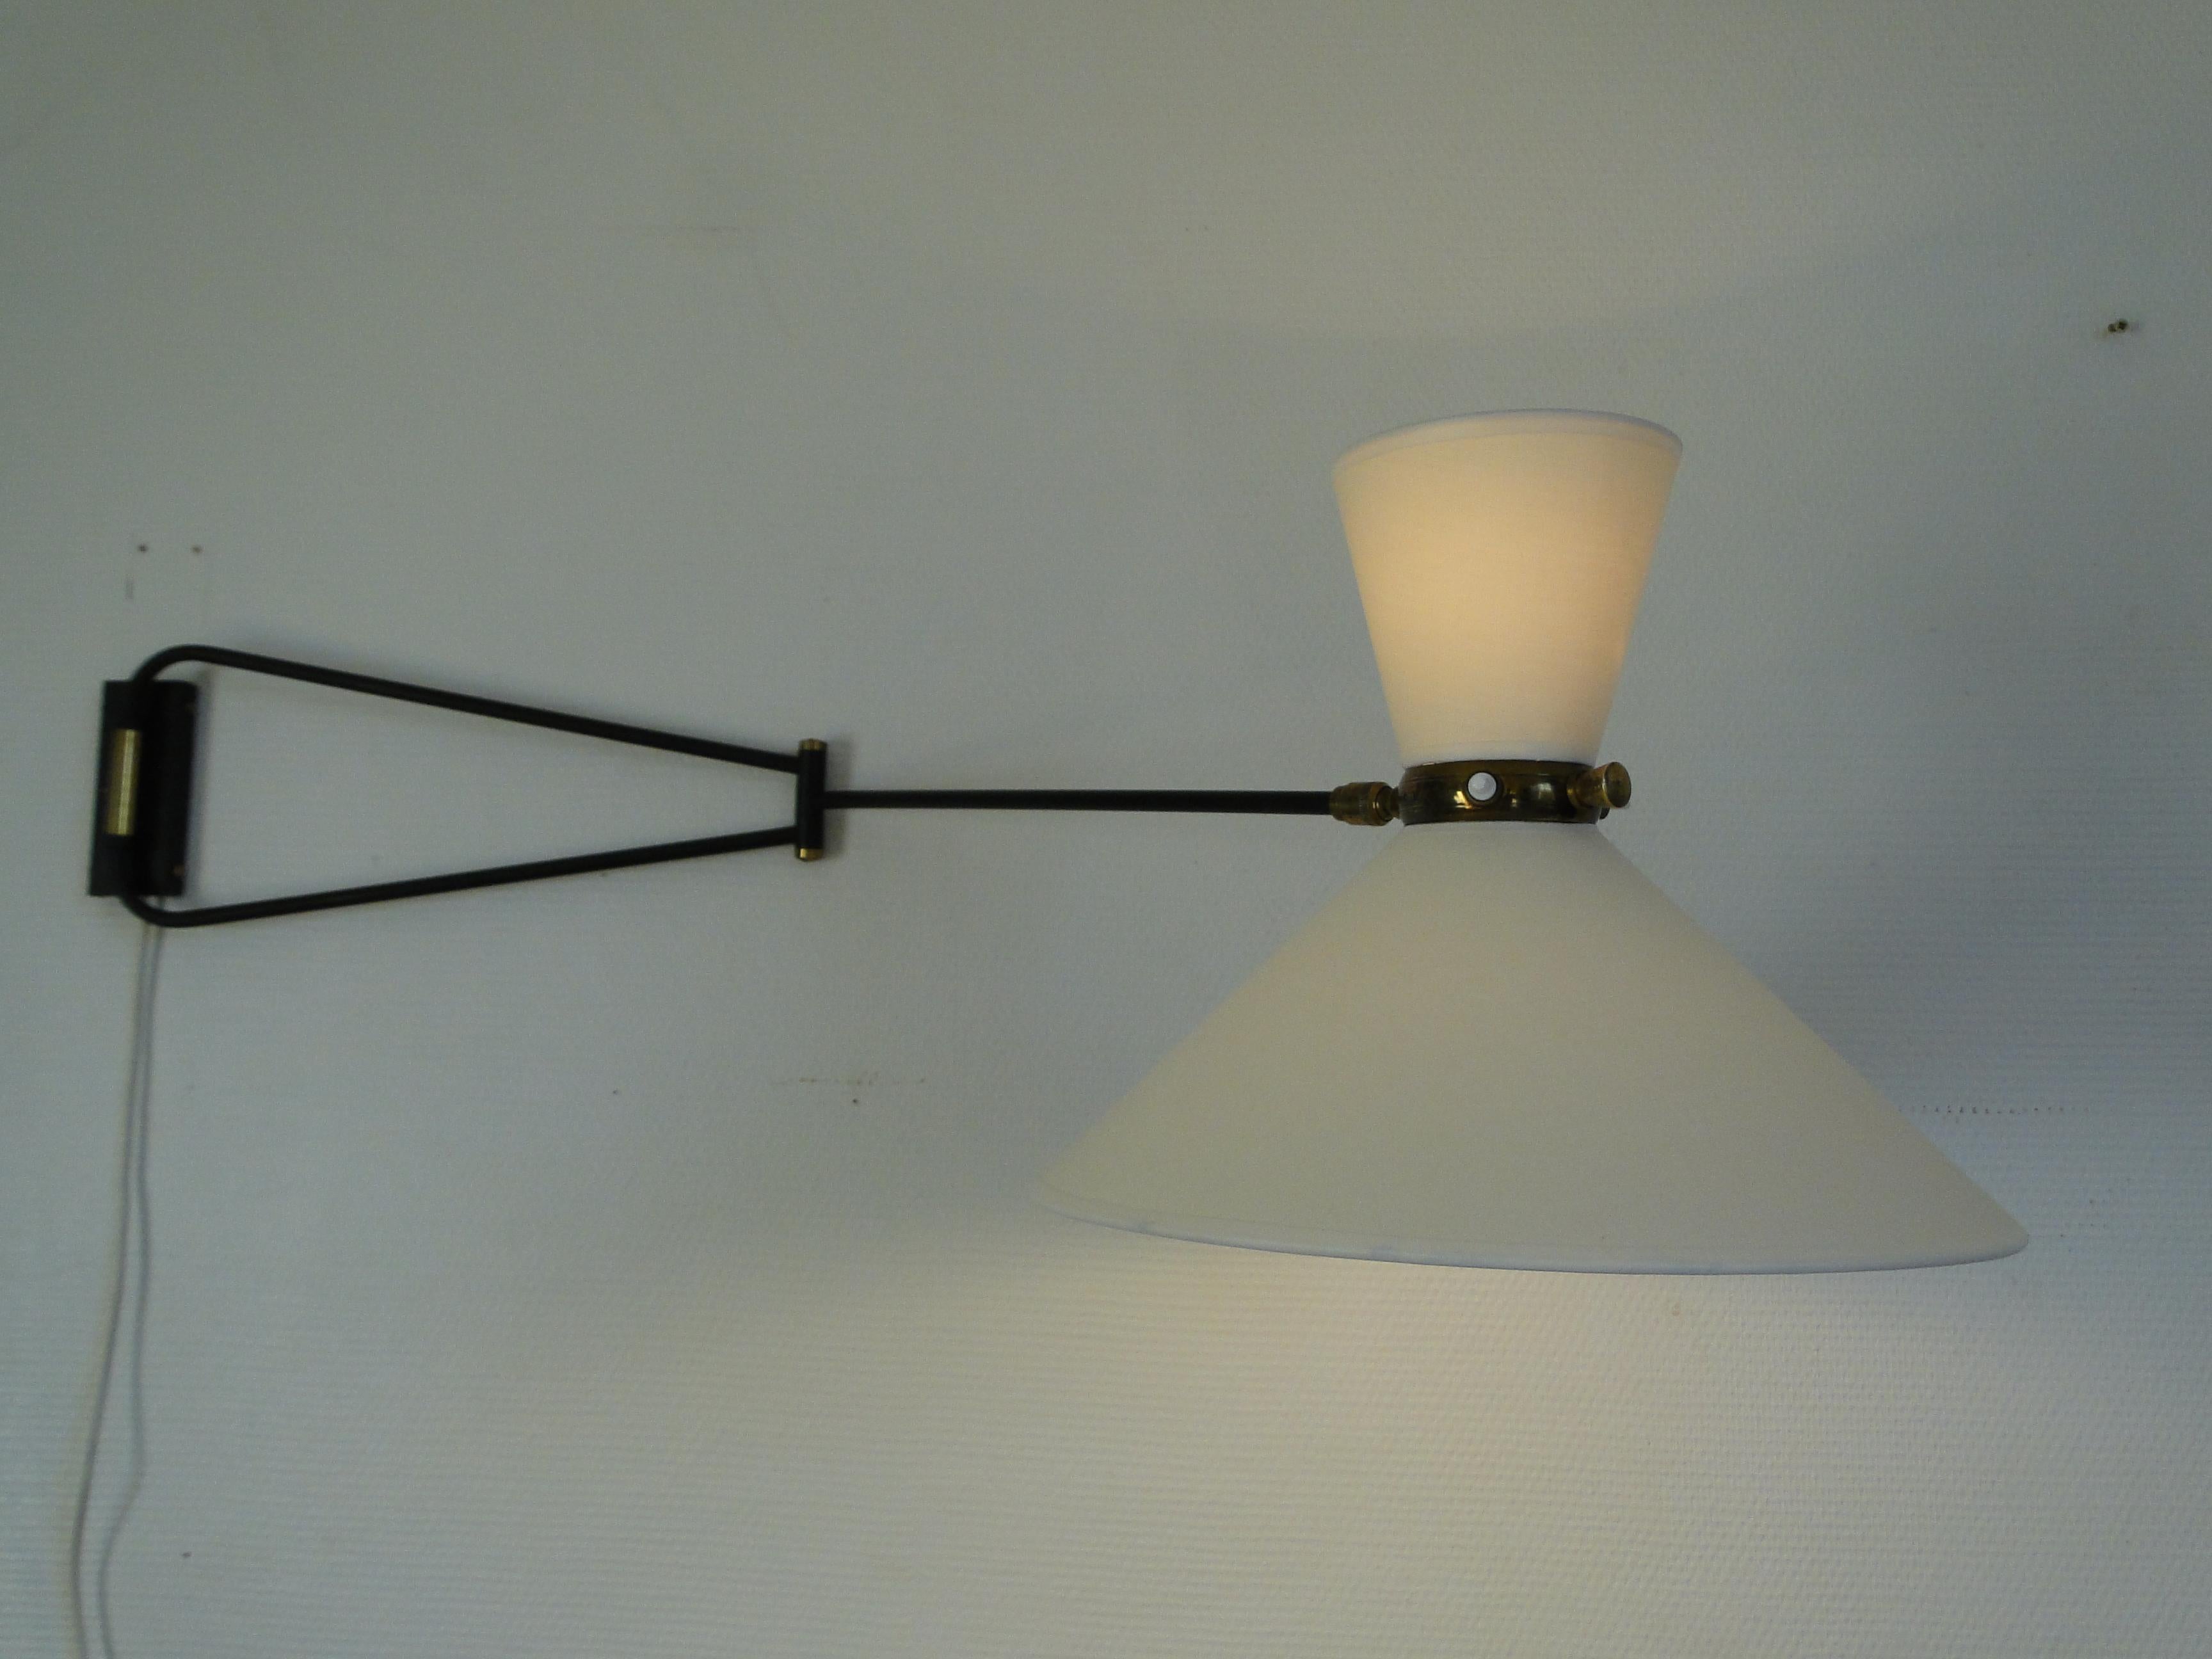 Vintage large wall lamp by René Mathieu 1950 France.

Wall light by René Mathieu from the 1950s.

2-Arm articulated metal and brass stem.

The double bulb sconce has independent switches for the up and down lights. 

New diabolo